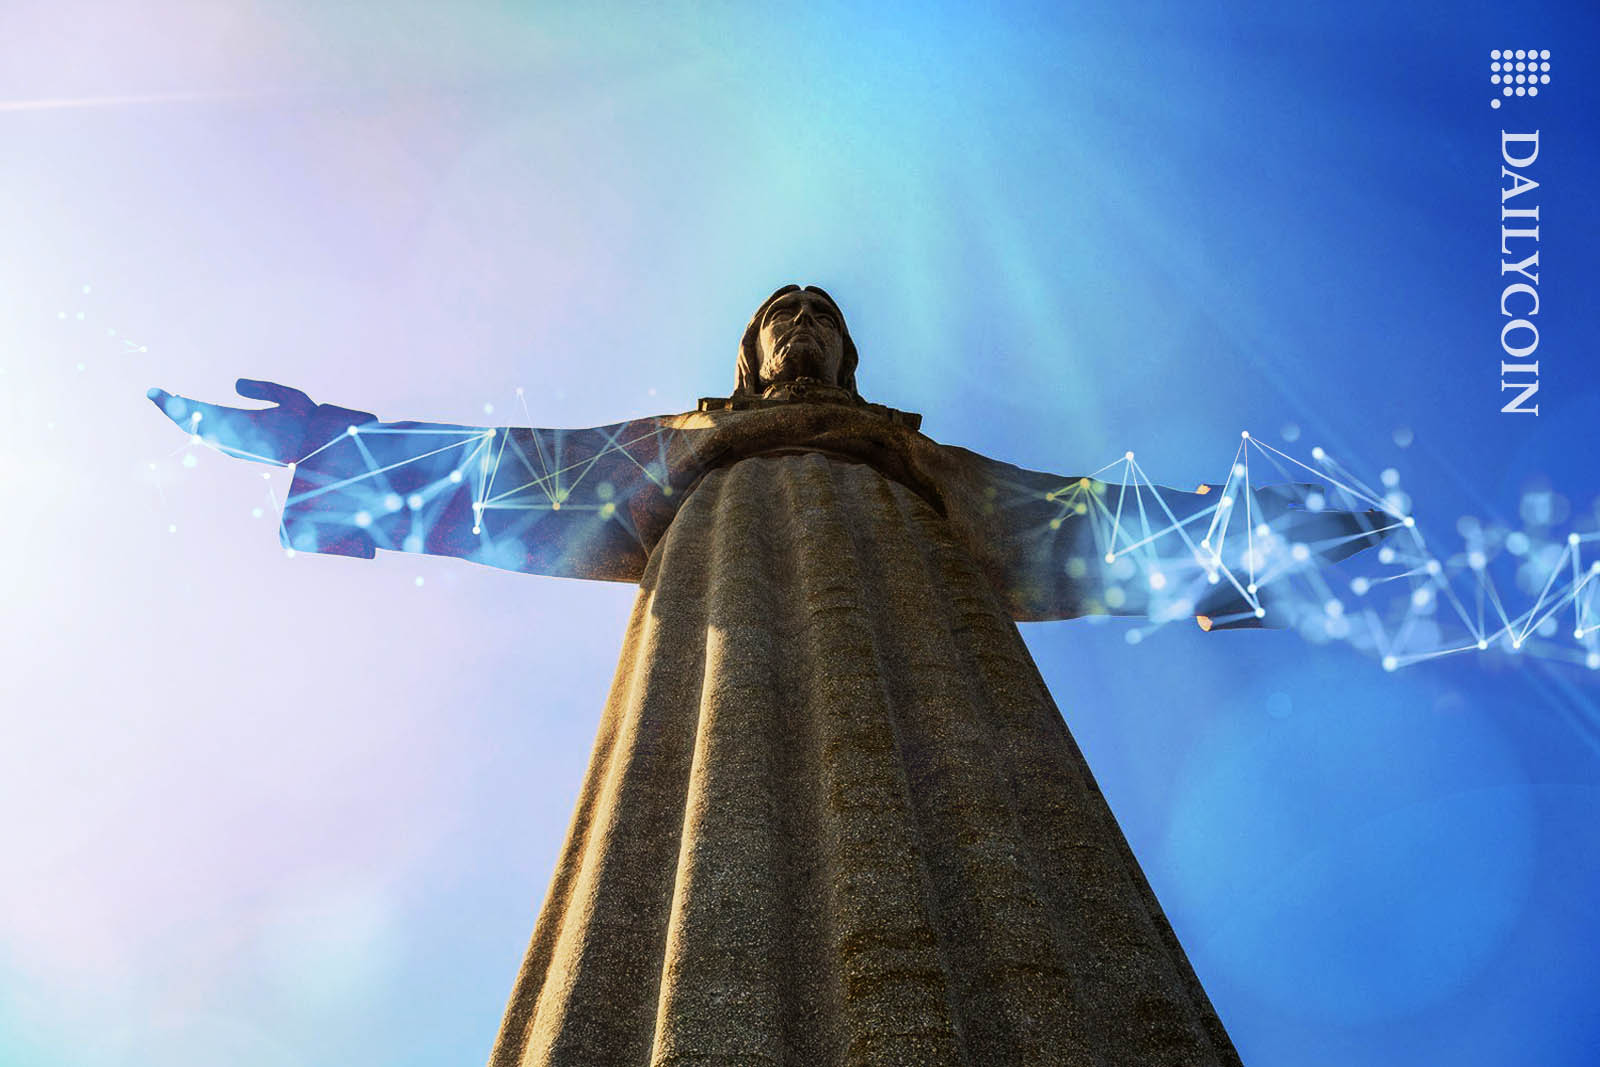 Christ the Redeemer statue in Brazil, spreading blockchain through his arms.